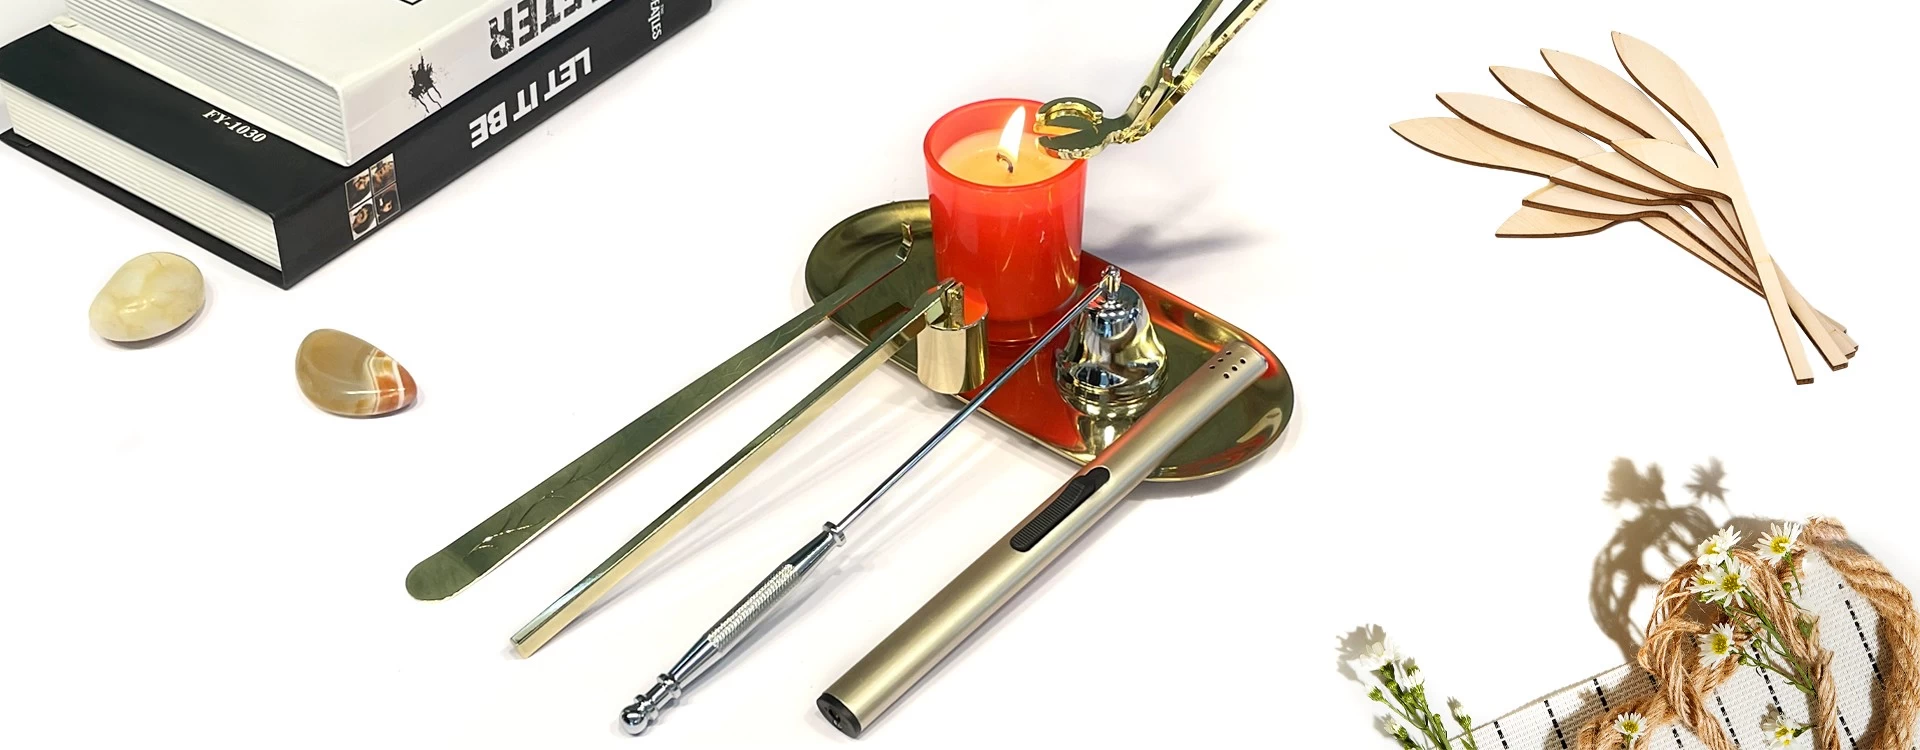 Scented Candle Tools Wick Scissors Accessory Set